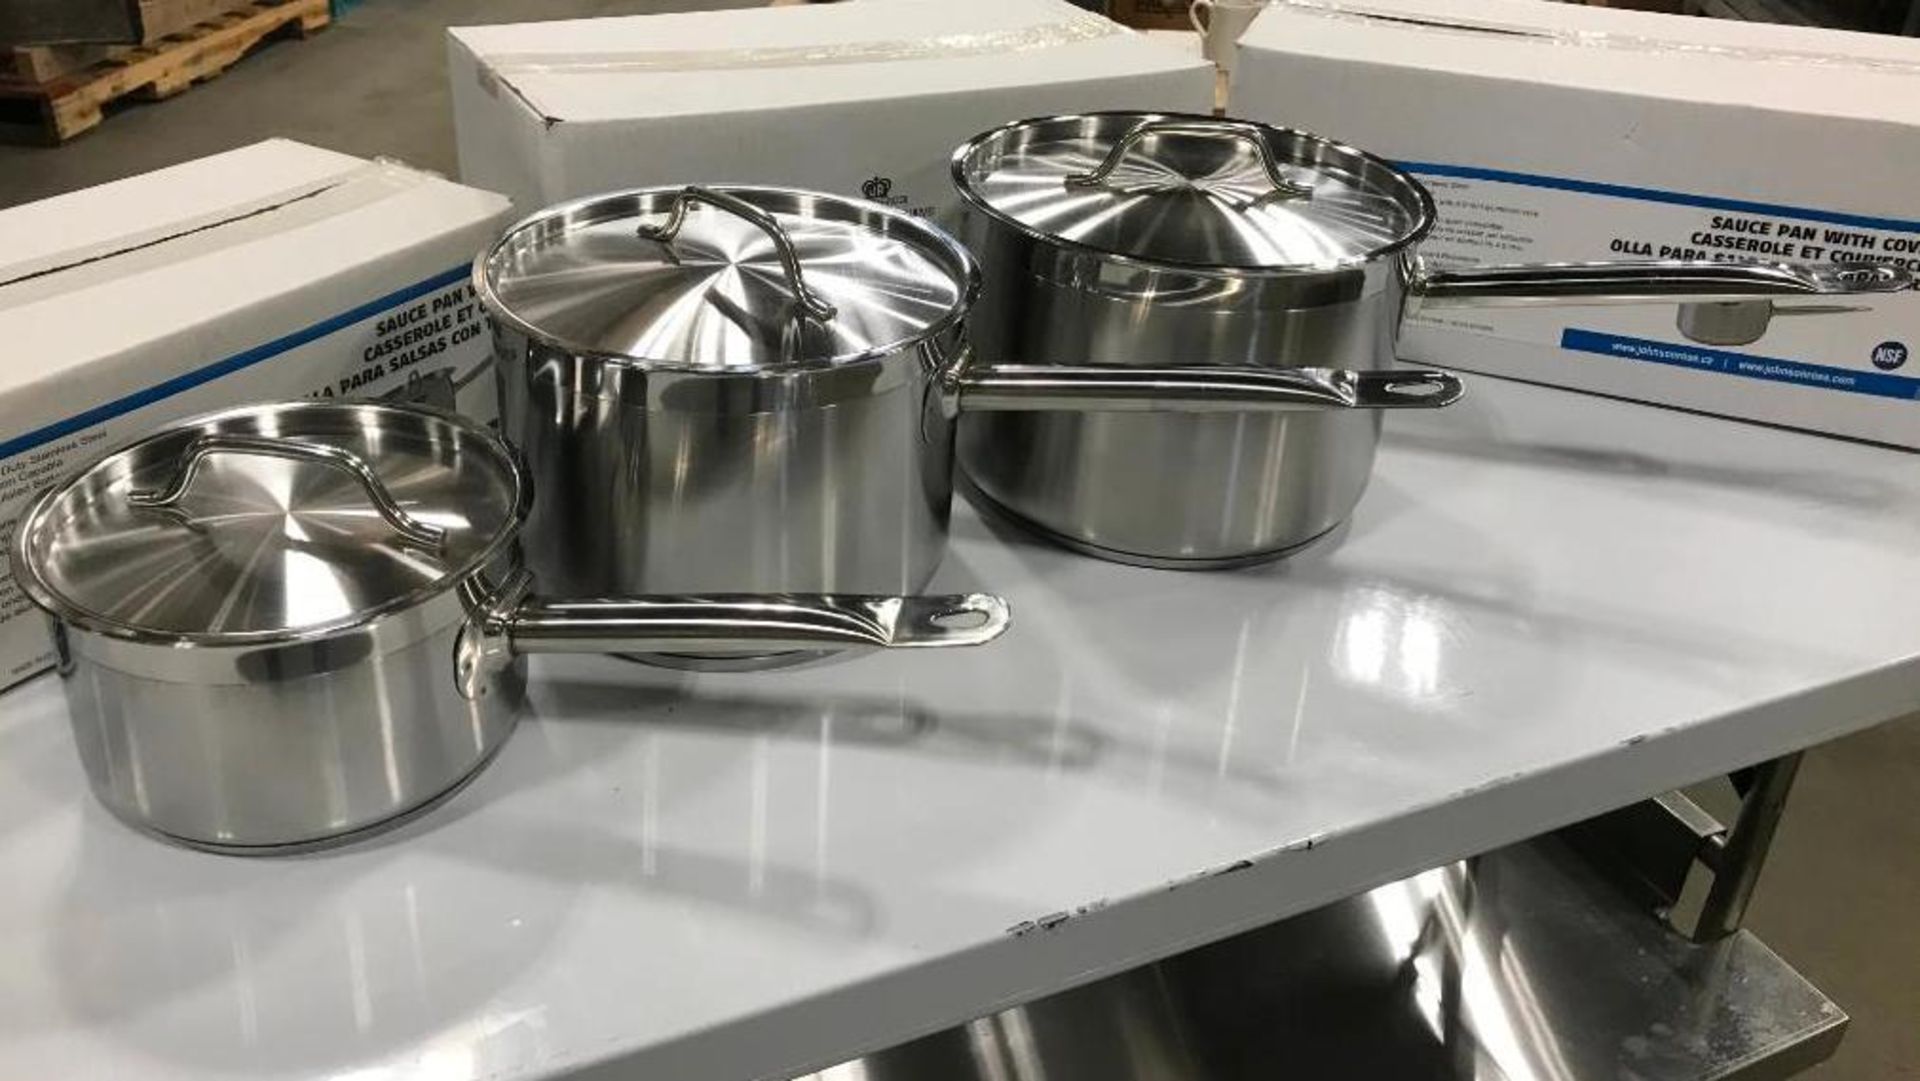 6QT, 4.5QT & 2QT HEAVY DUTY STAINLESS SAUCE PAN SET INDUCTION CAPABLE - NEW - Image 5 of 5